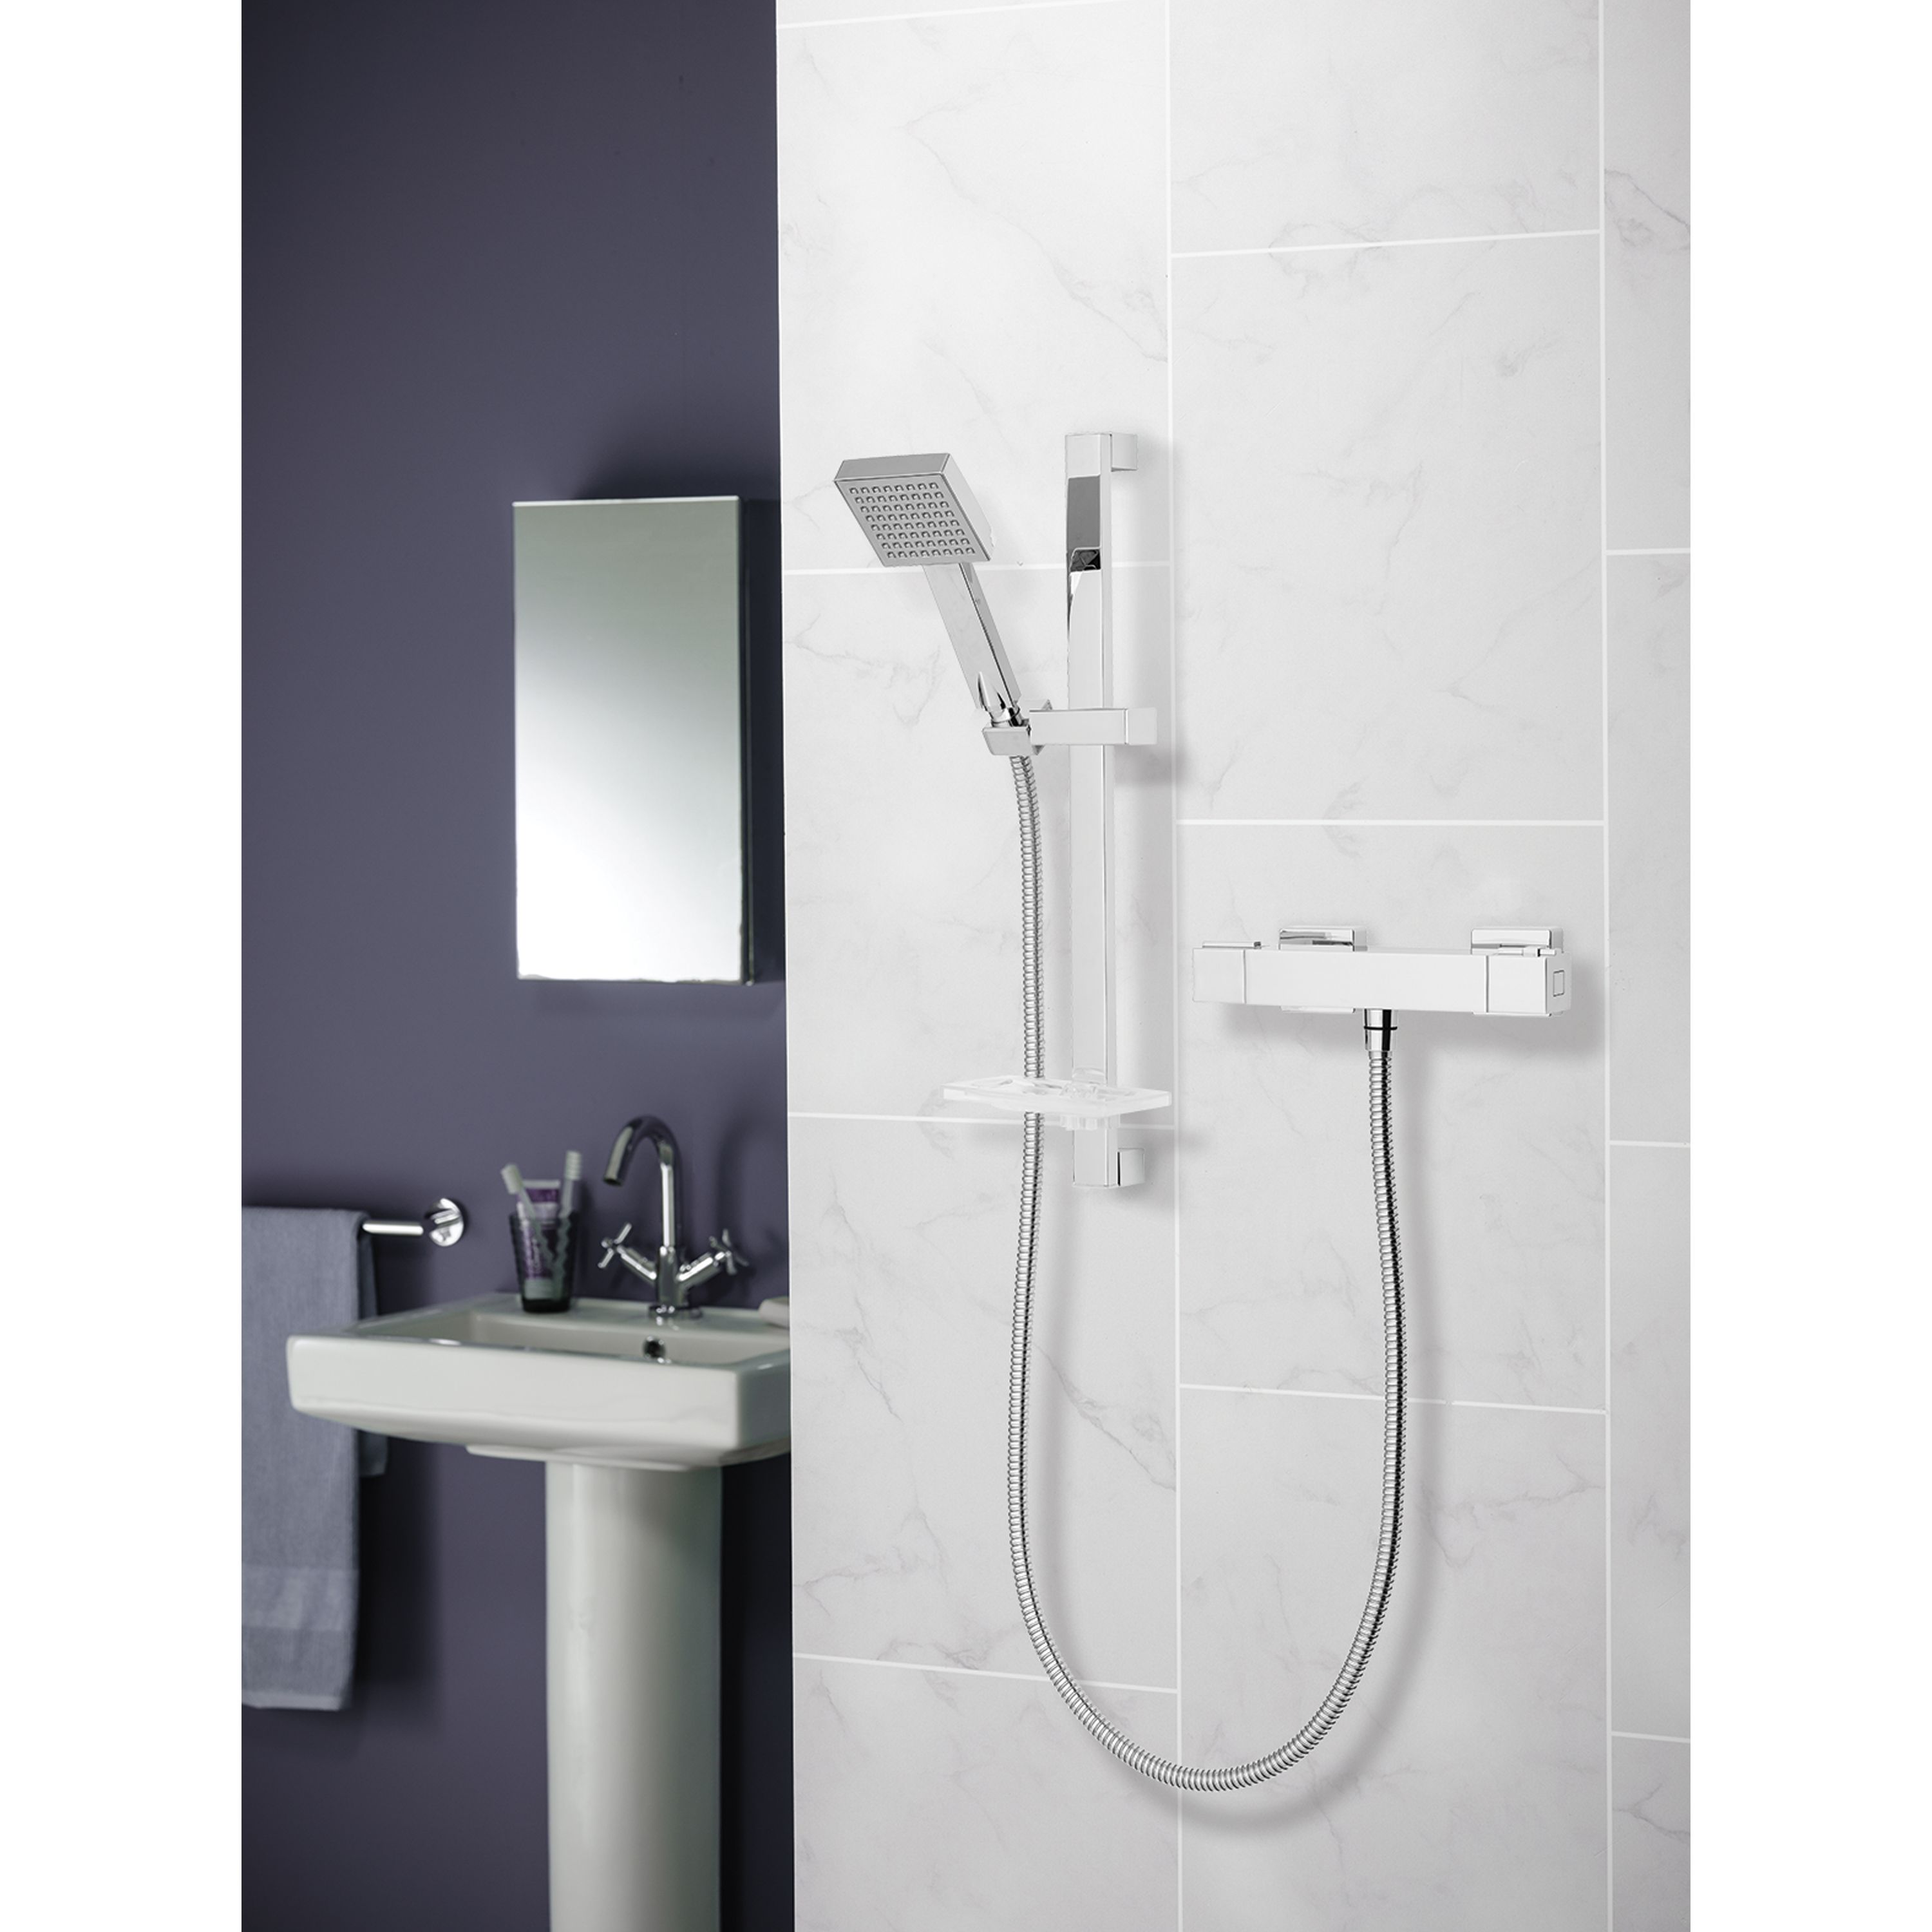 Triton Excellente Chrome effect Rear fed Thermostatic Mixer Shower